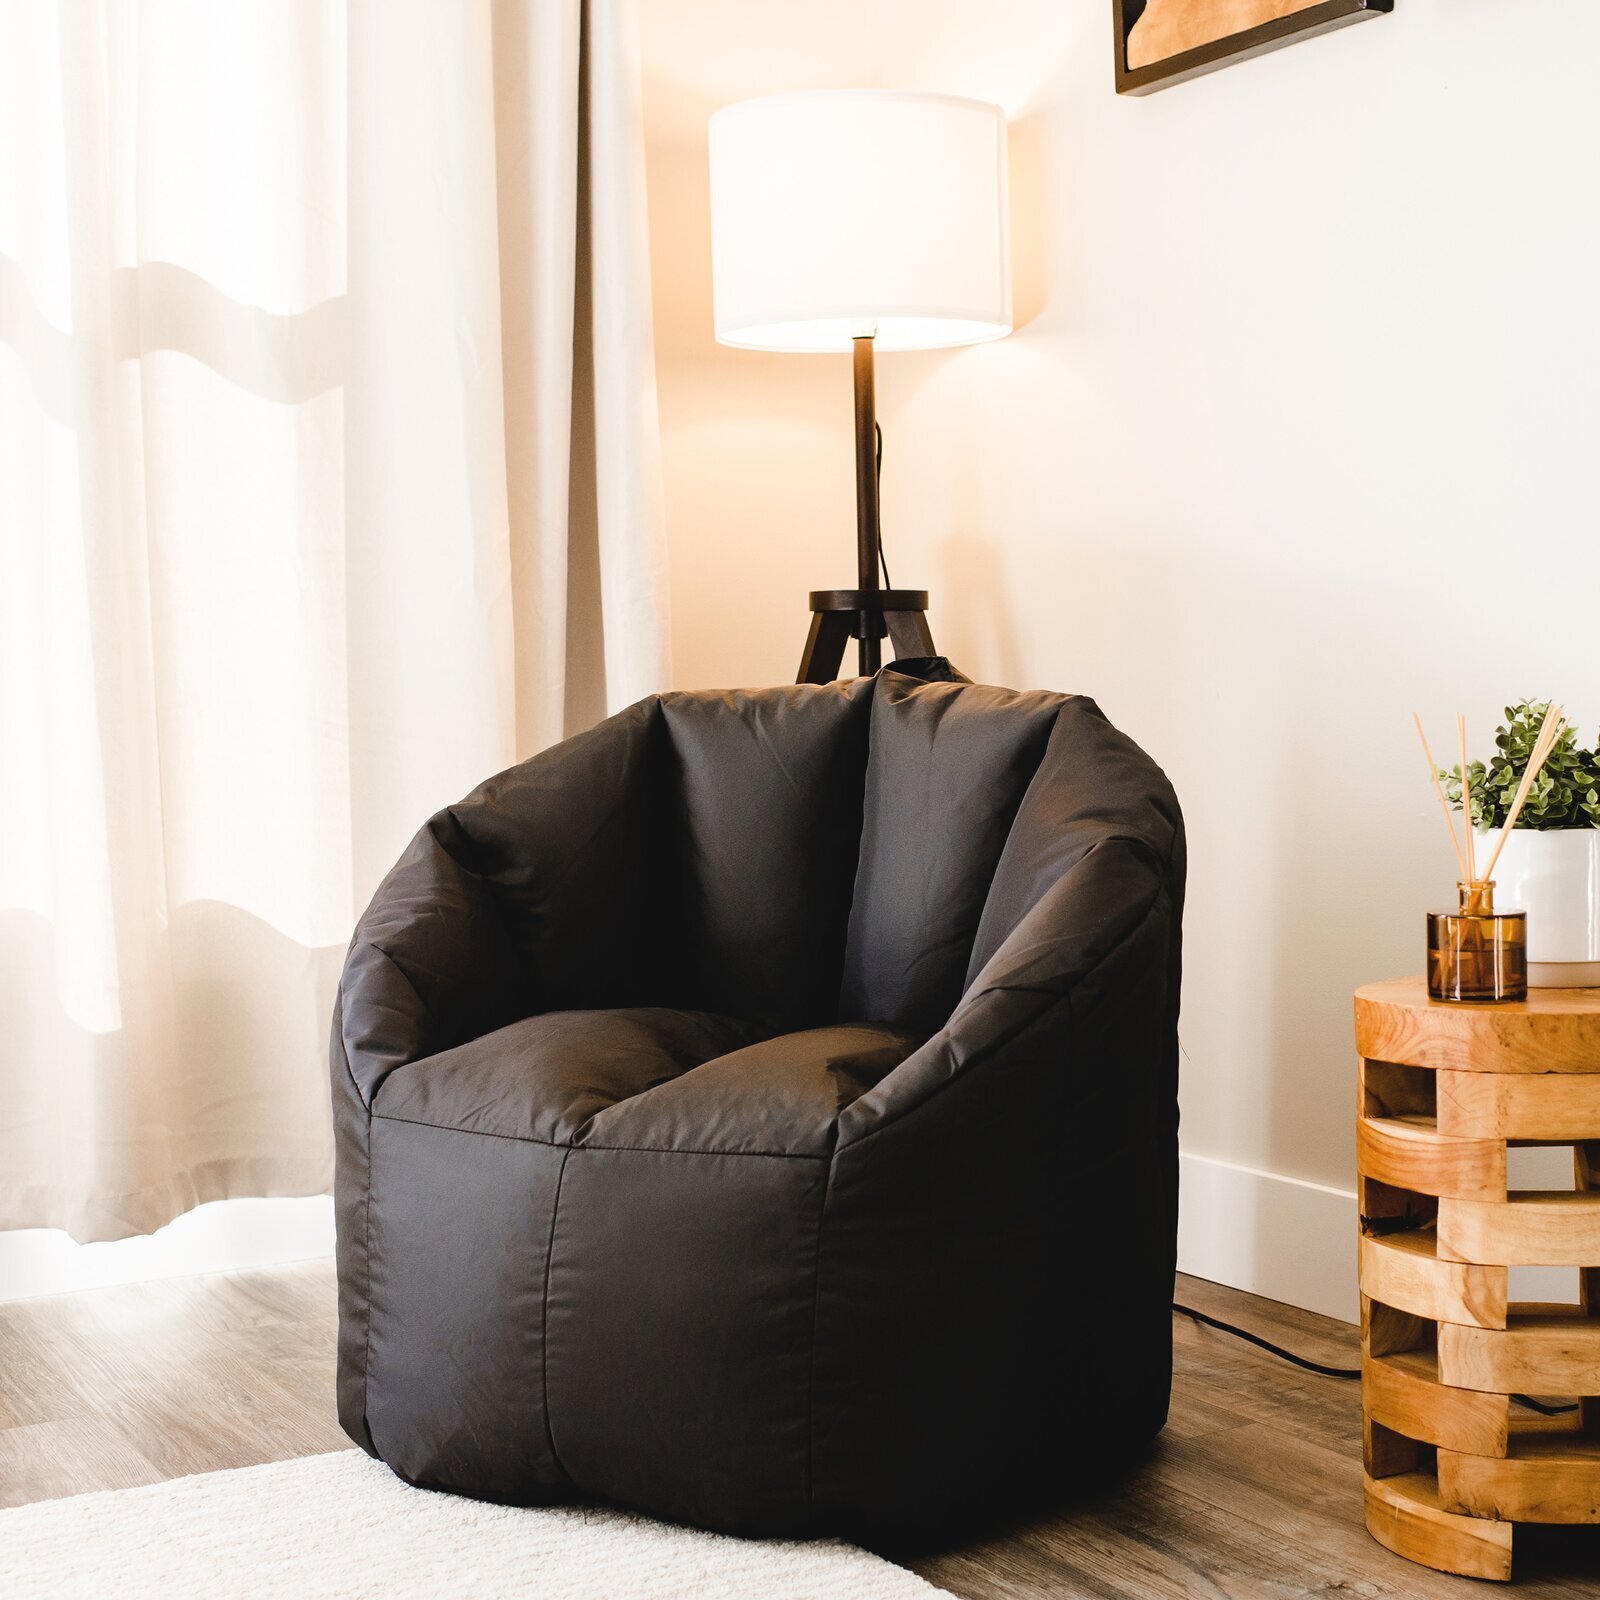 Comfortable Bean Bag With Back Support